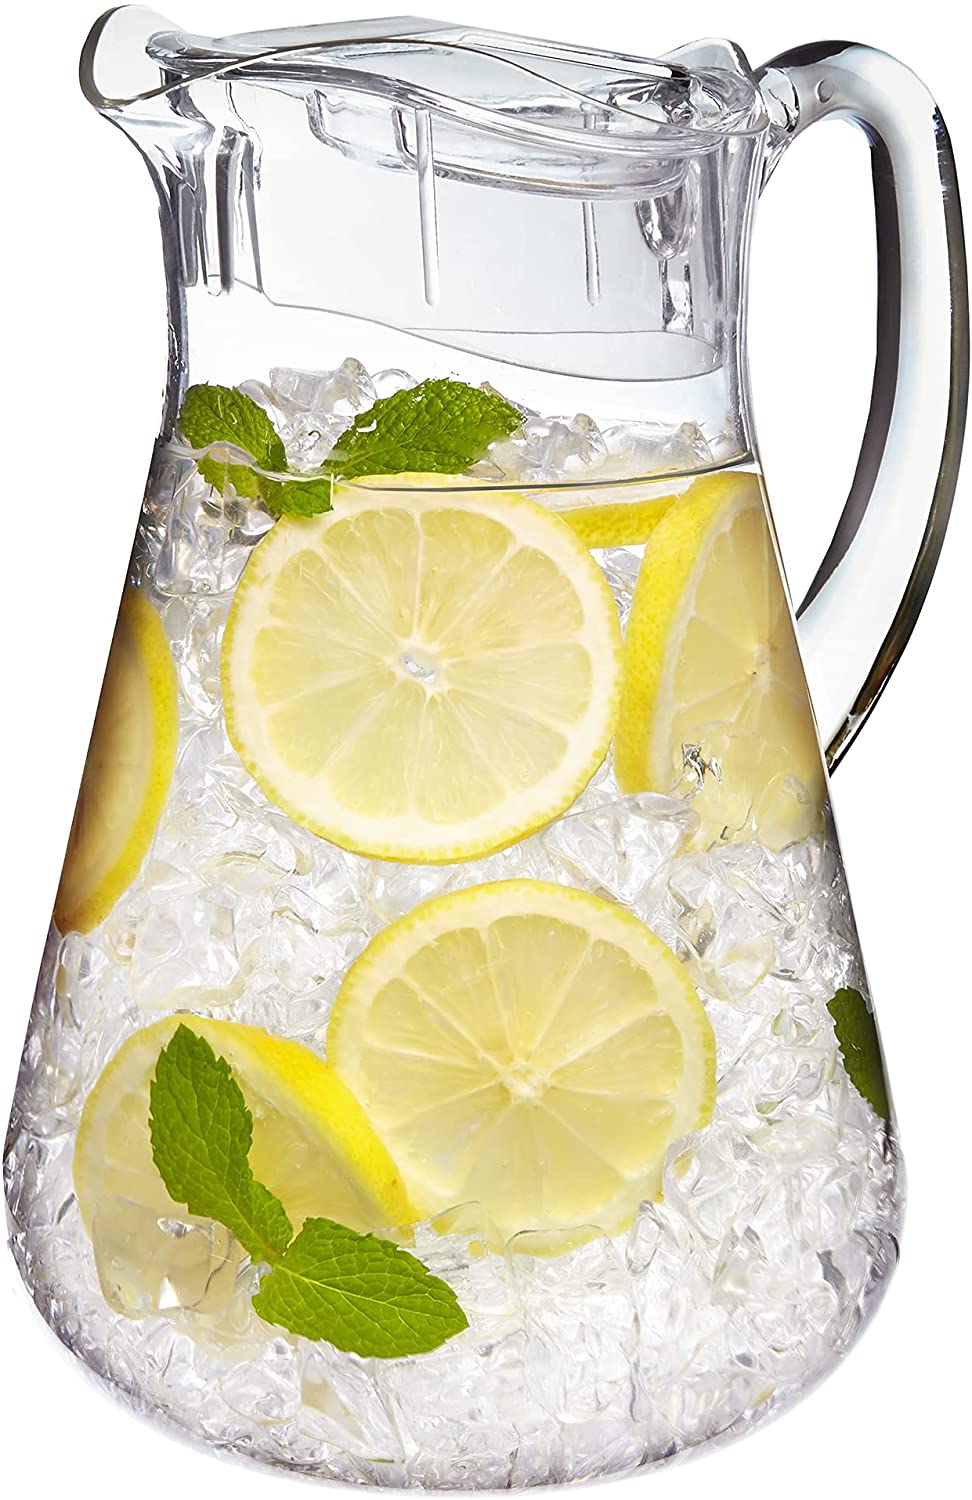 2.5 Quarts Acrylic Pitcher with Lid, Crystal Clear Break Resistant Premium  Acrylic Pitcher for All Purpose BPA Free